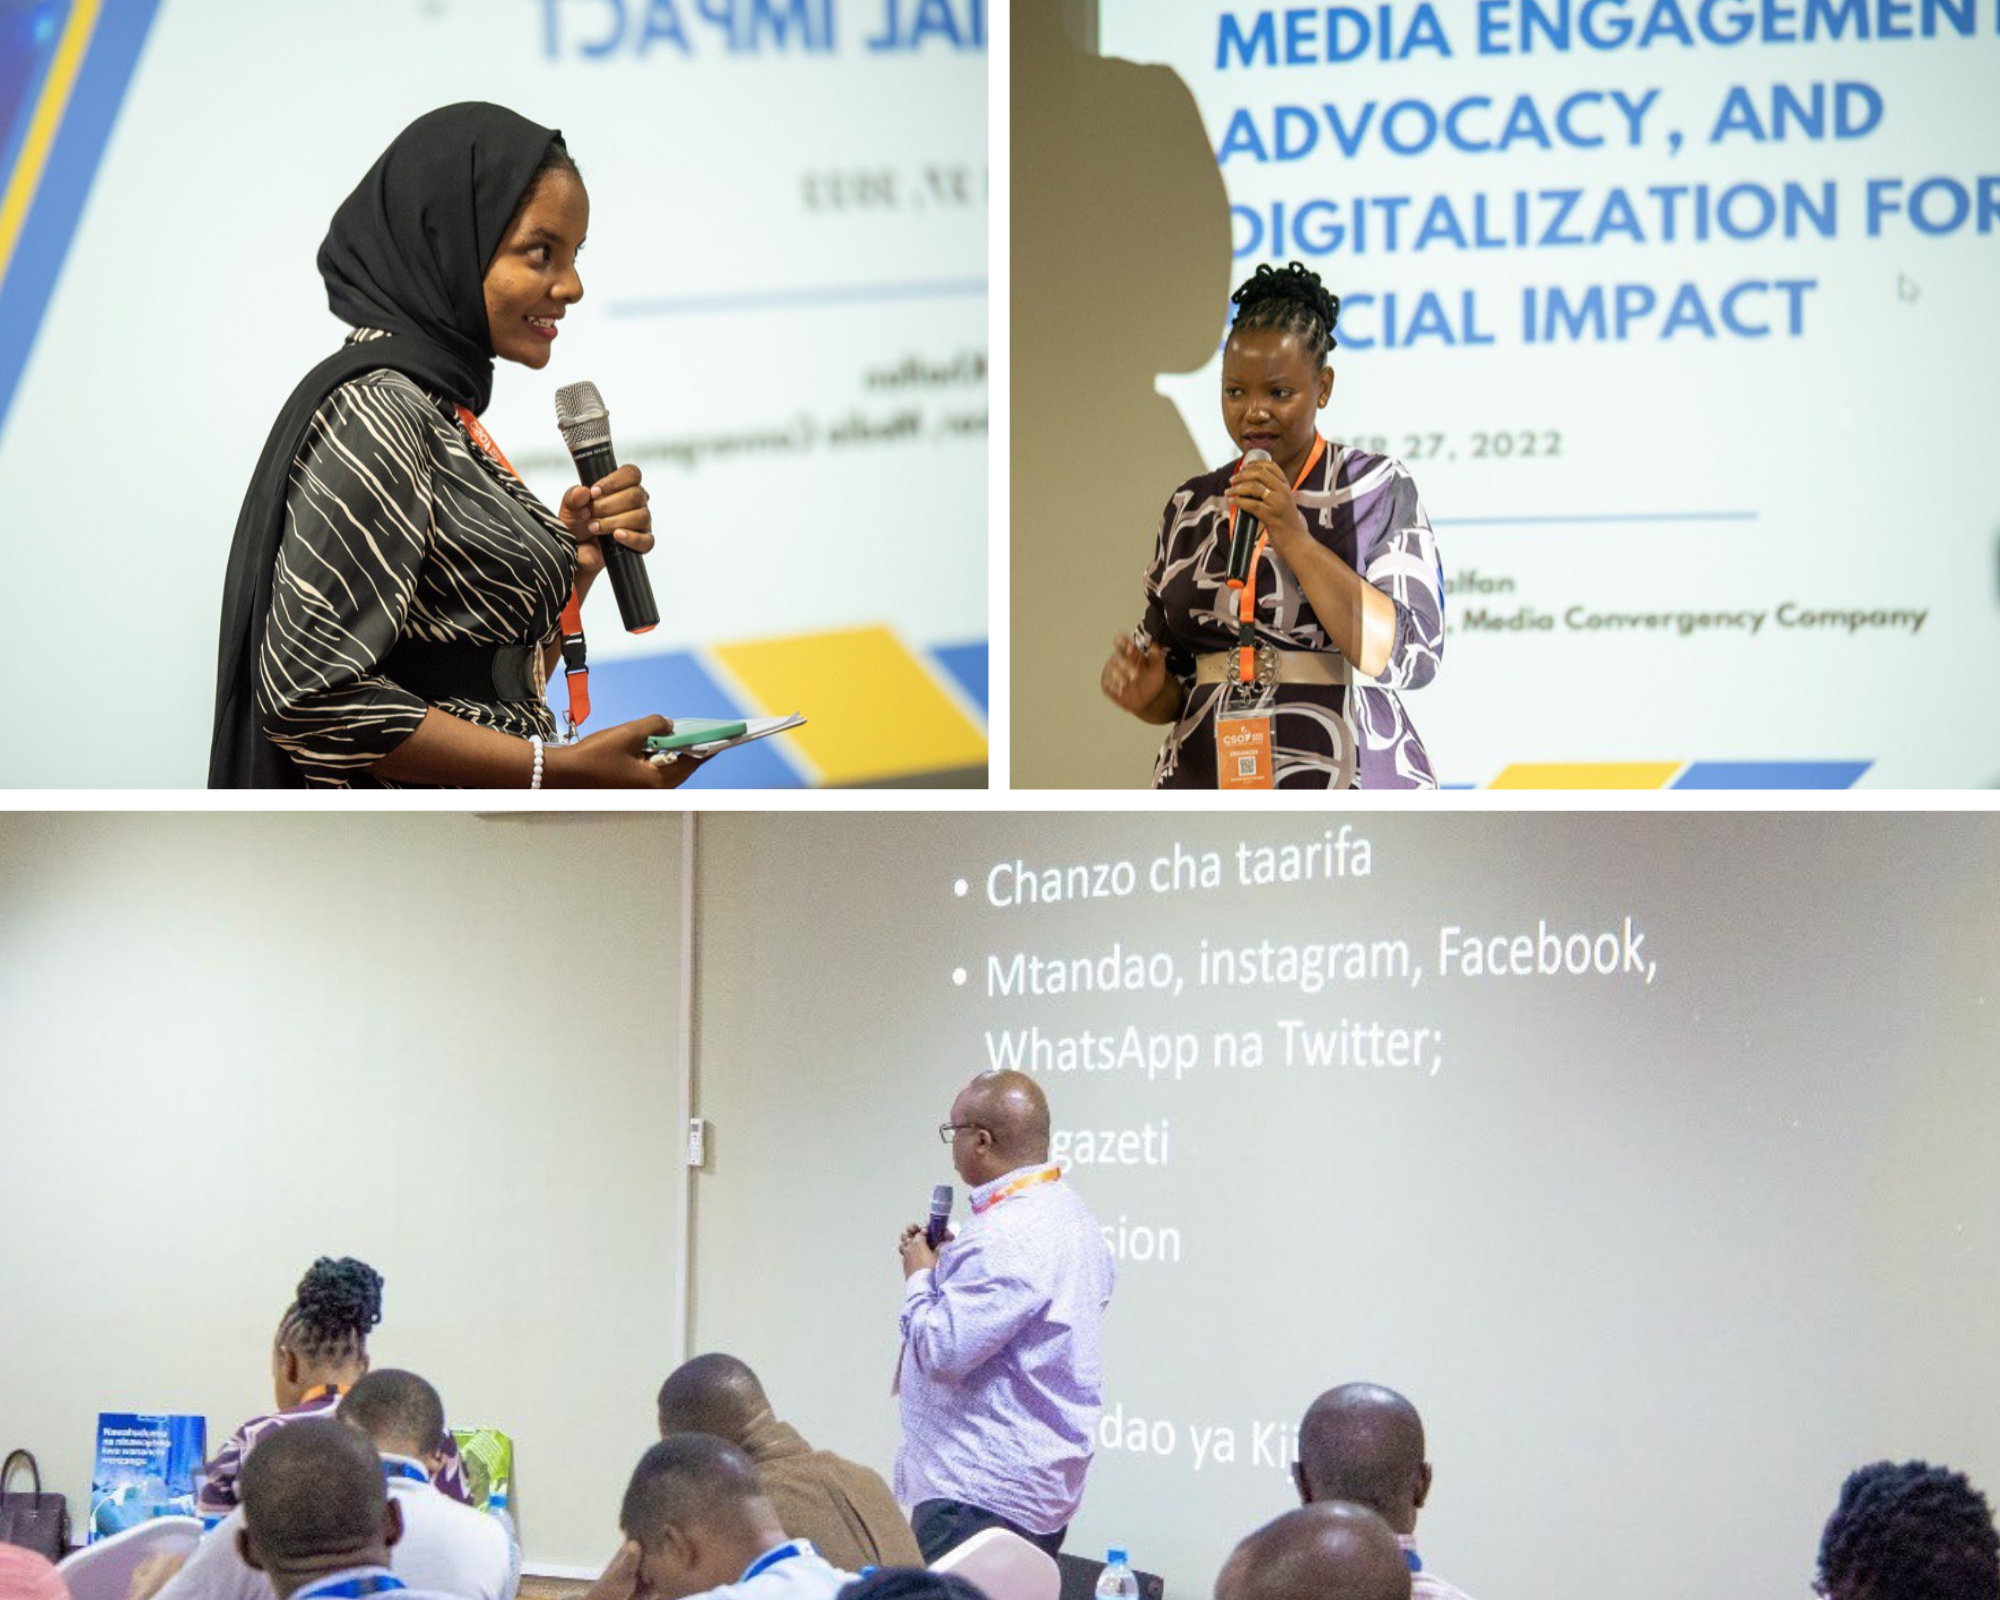 Clinic Session: Media engagement and Digital Advocacy for Social Impact